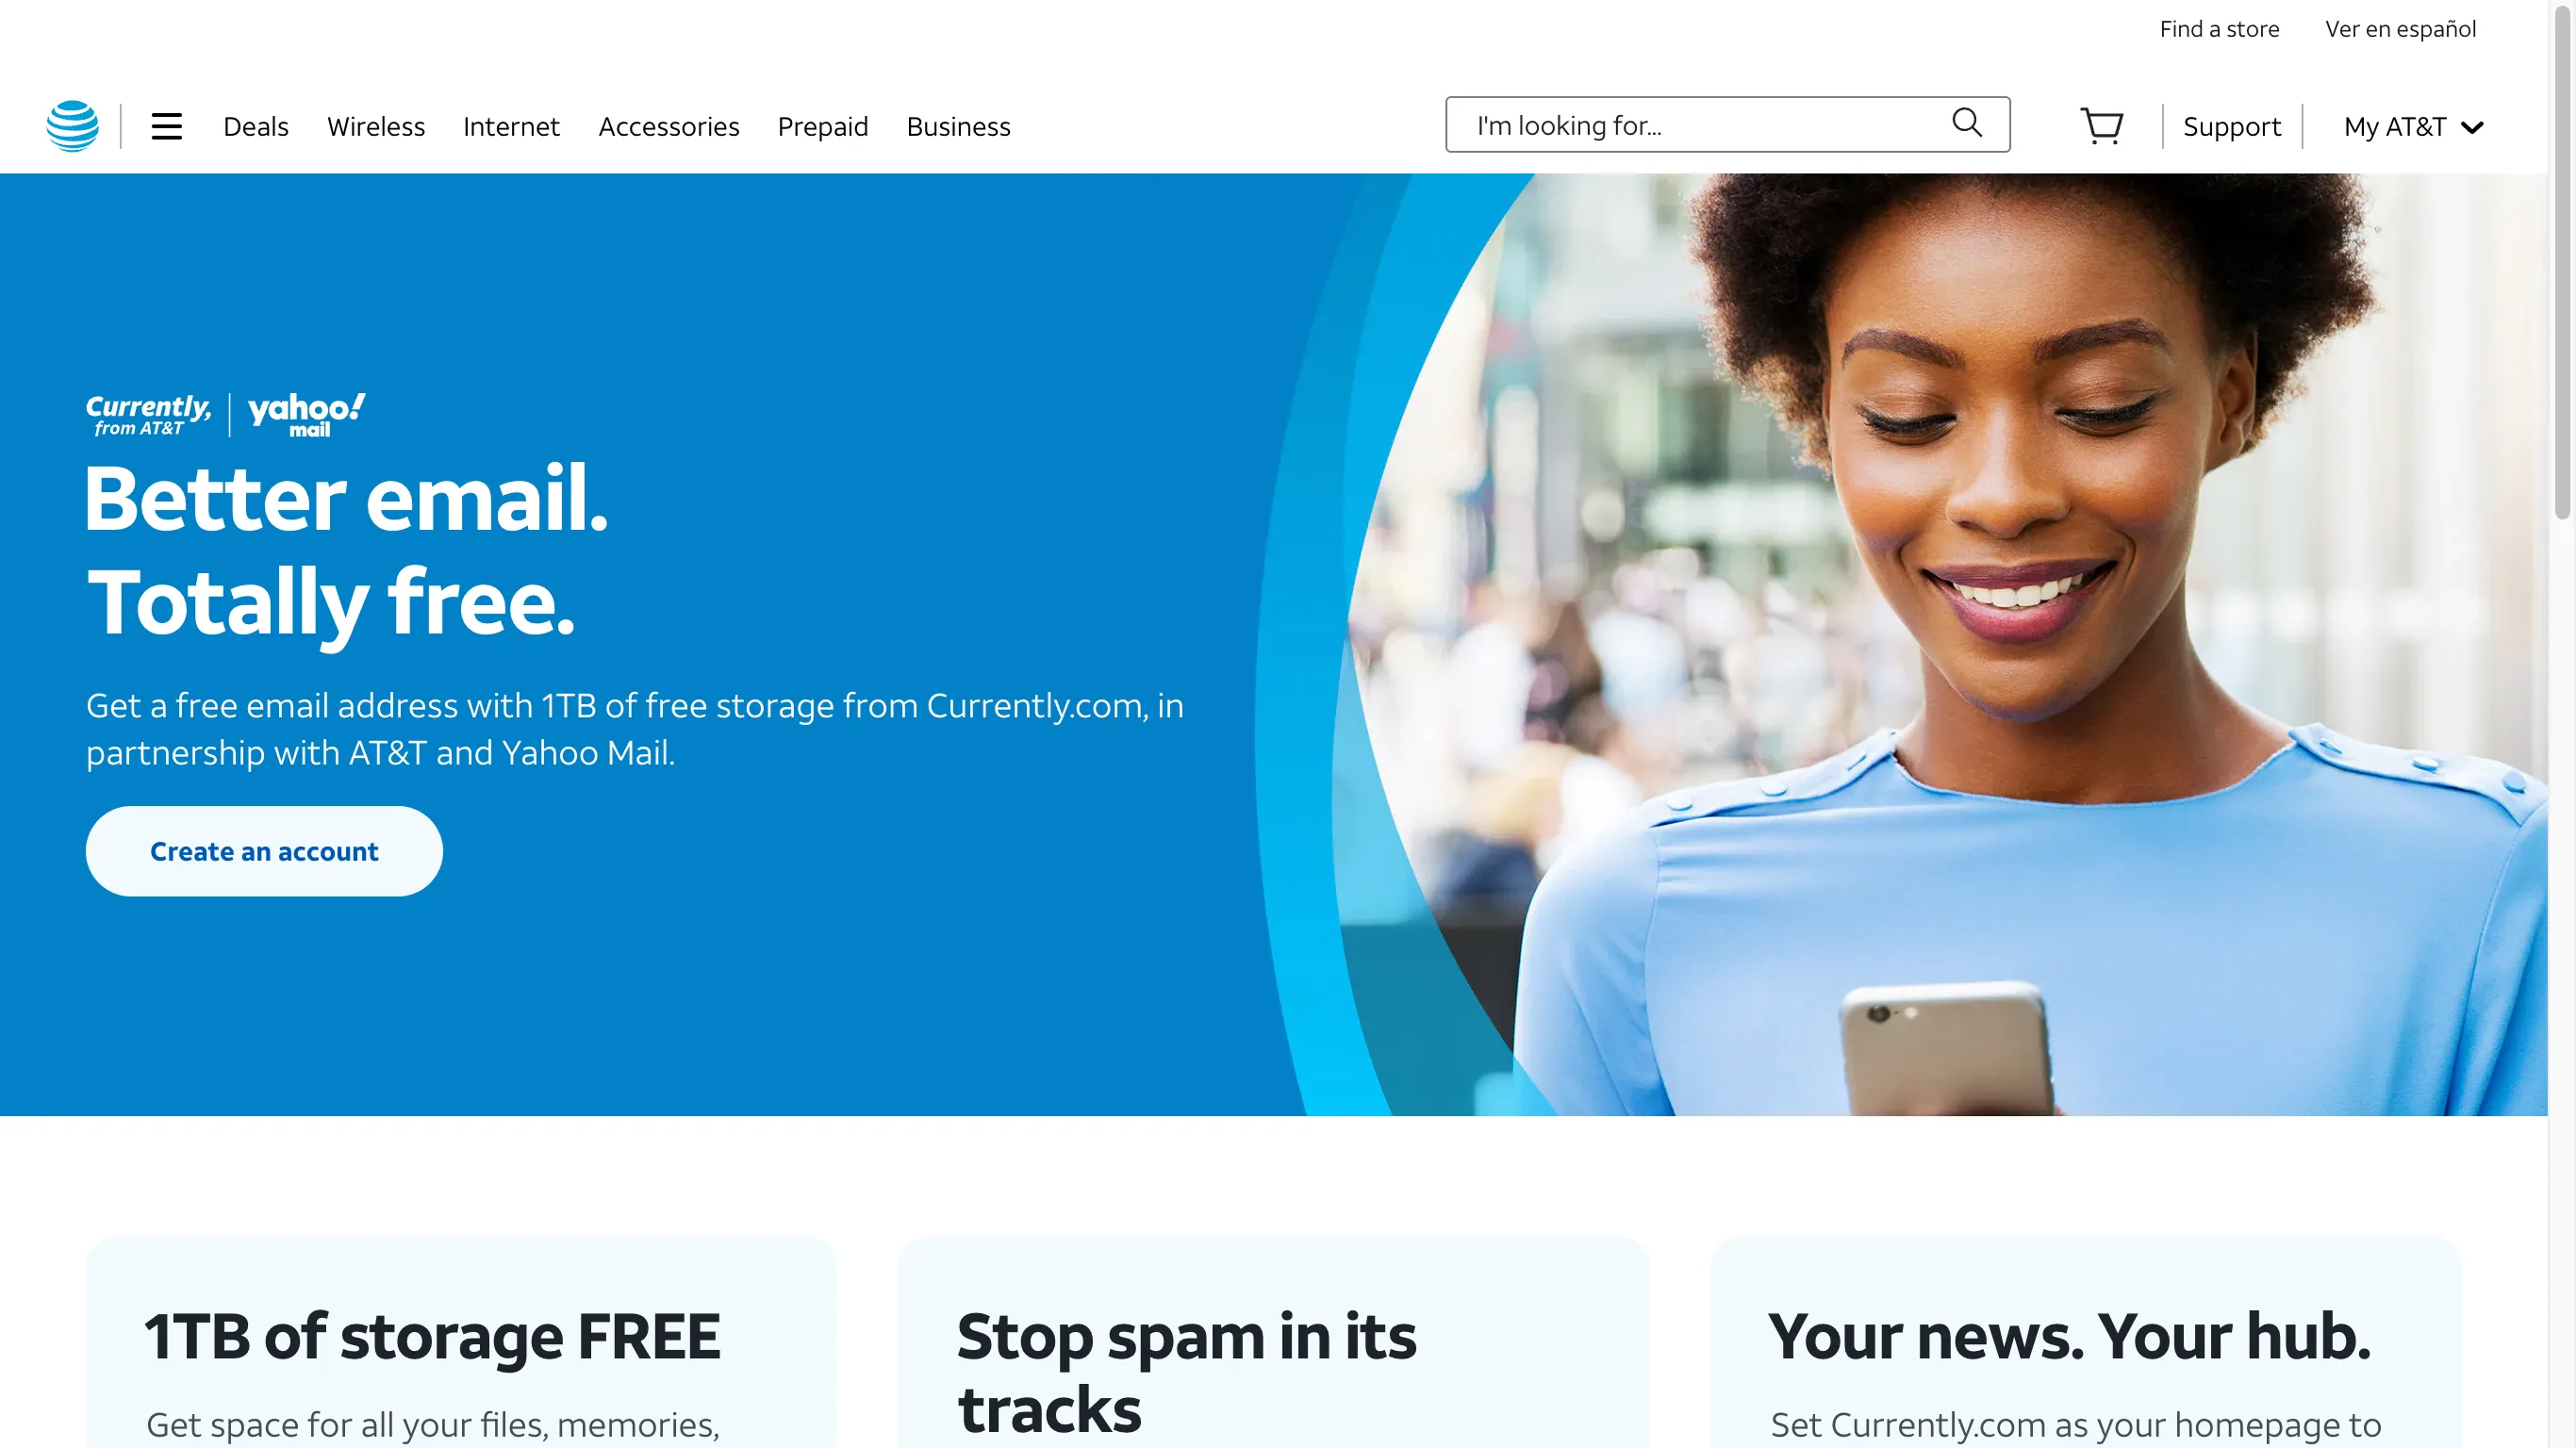 AT&T is a closed-source email service.